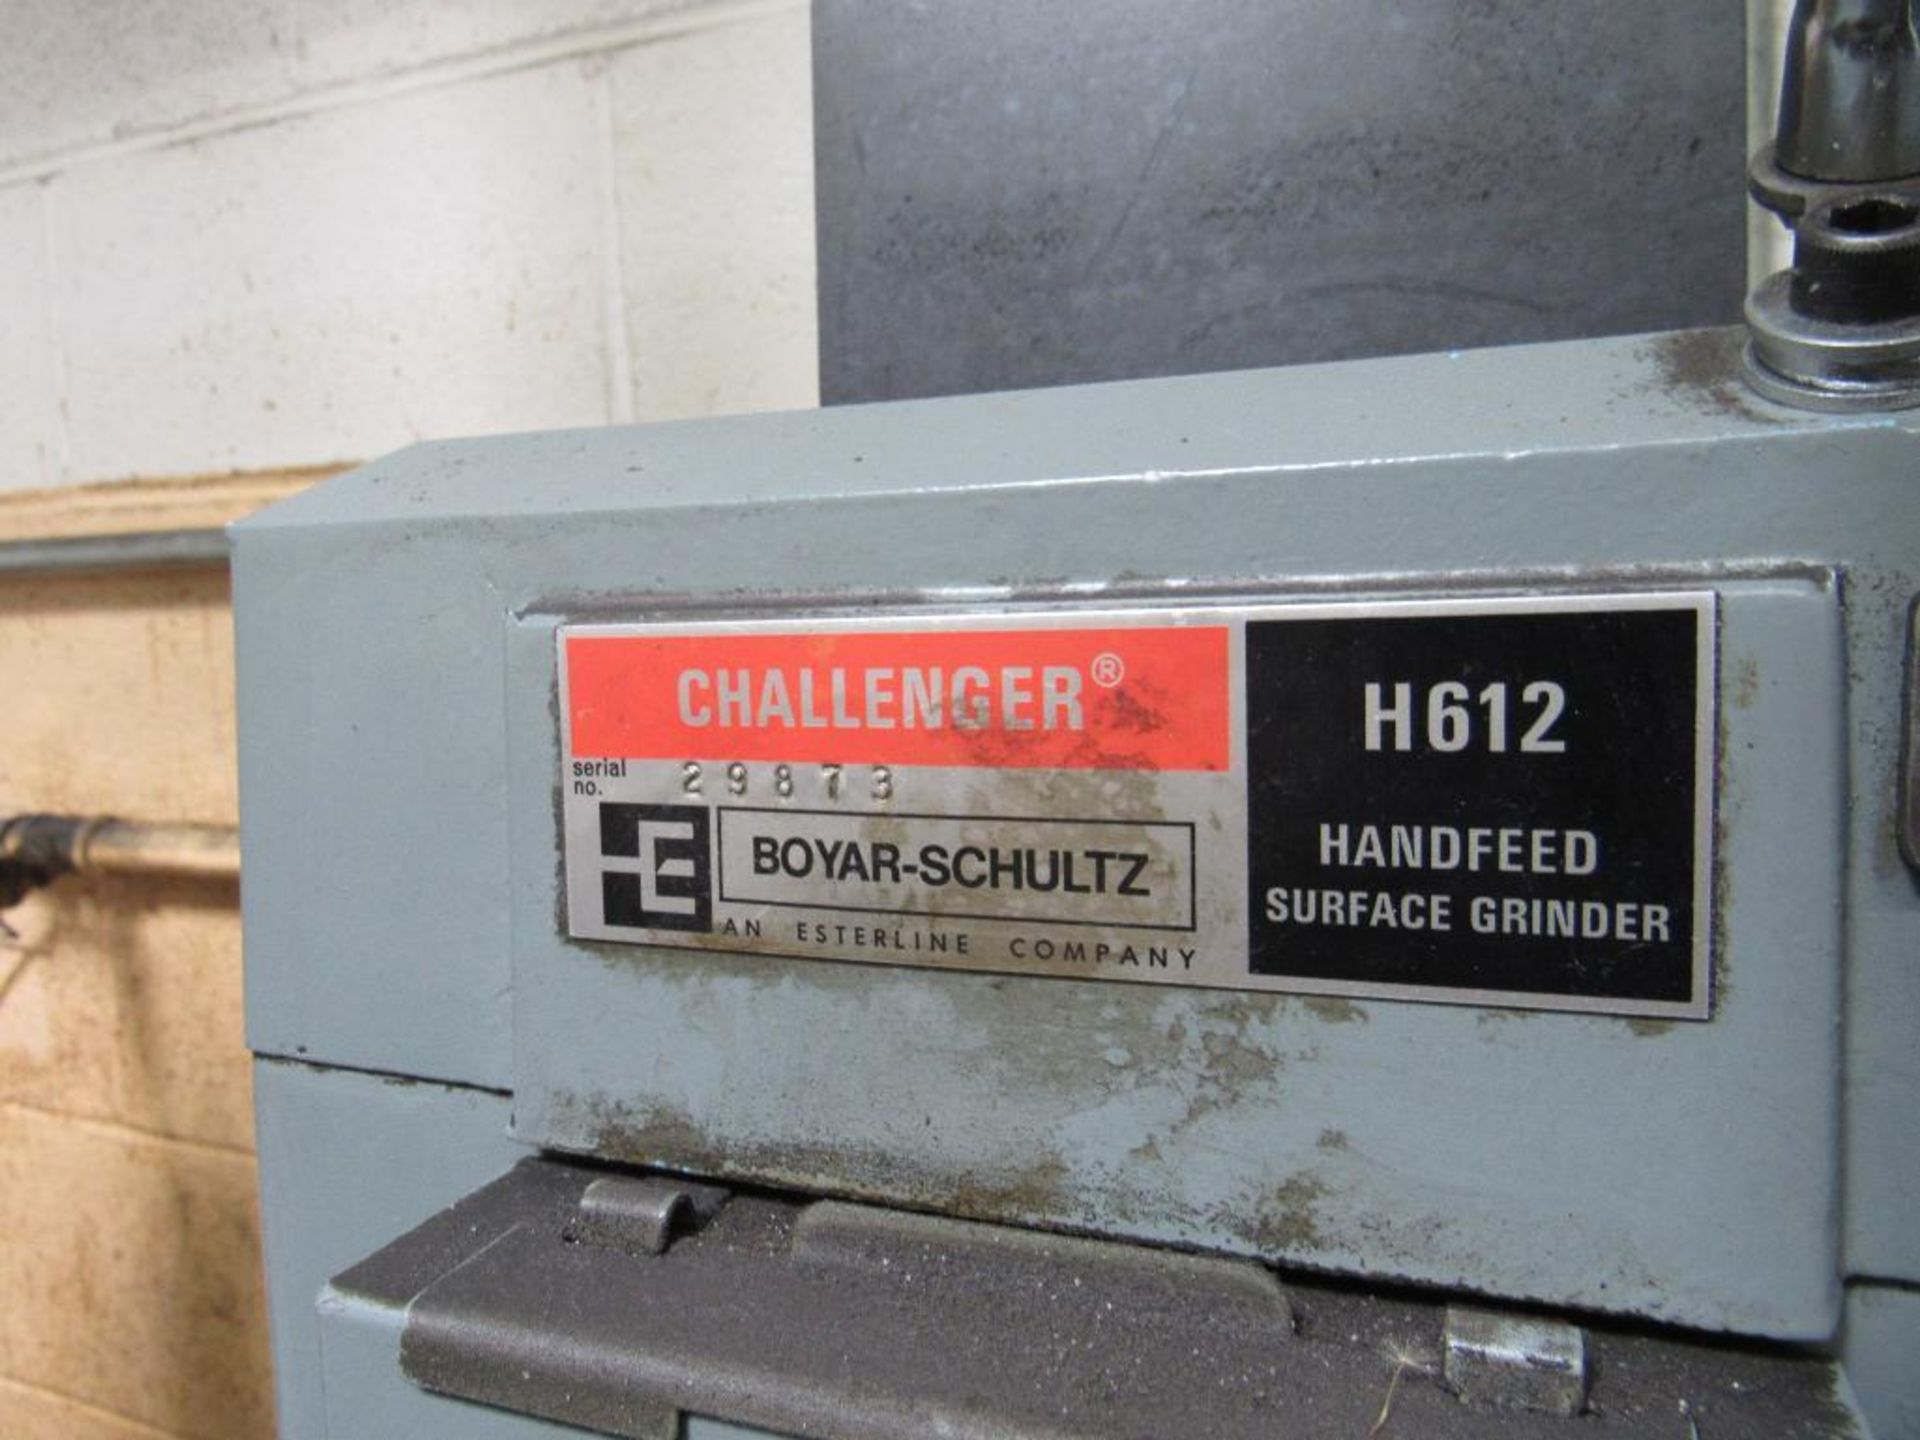 Boyar Schultz 6 in. x 12 in. Hand Feed Surface Grinder Model H612, S/N 29873 - Image 4 of 4